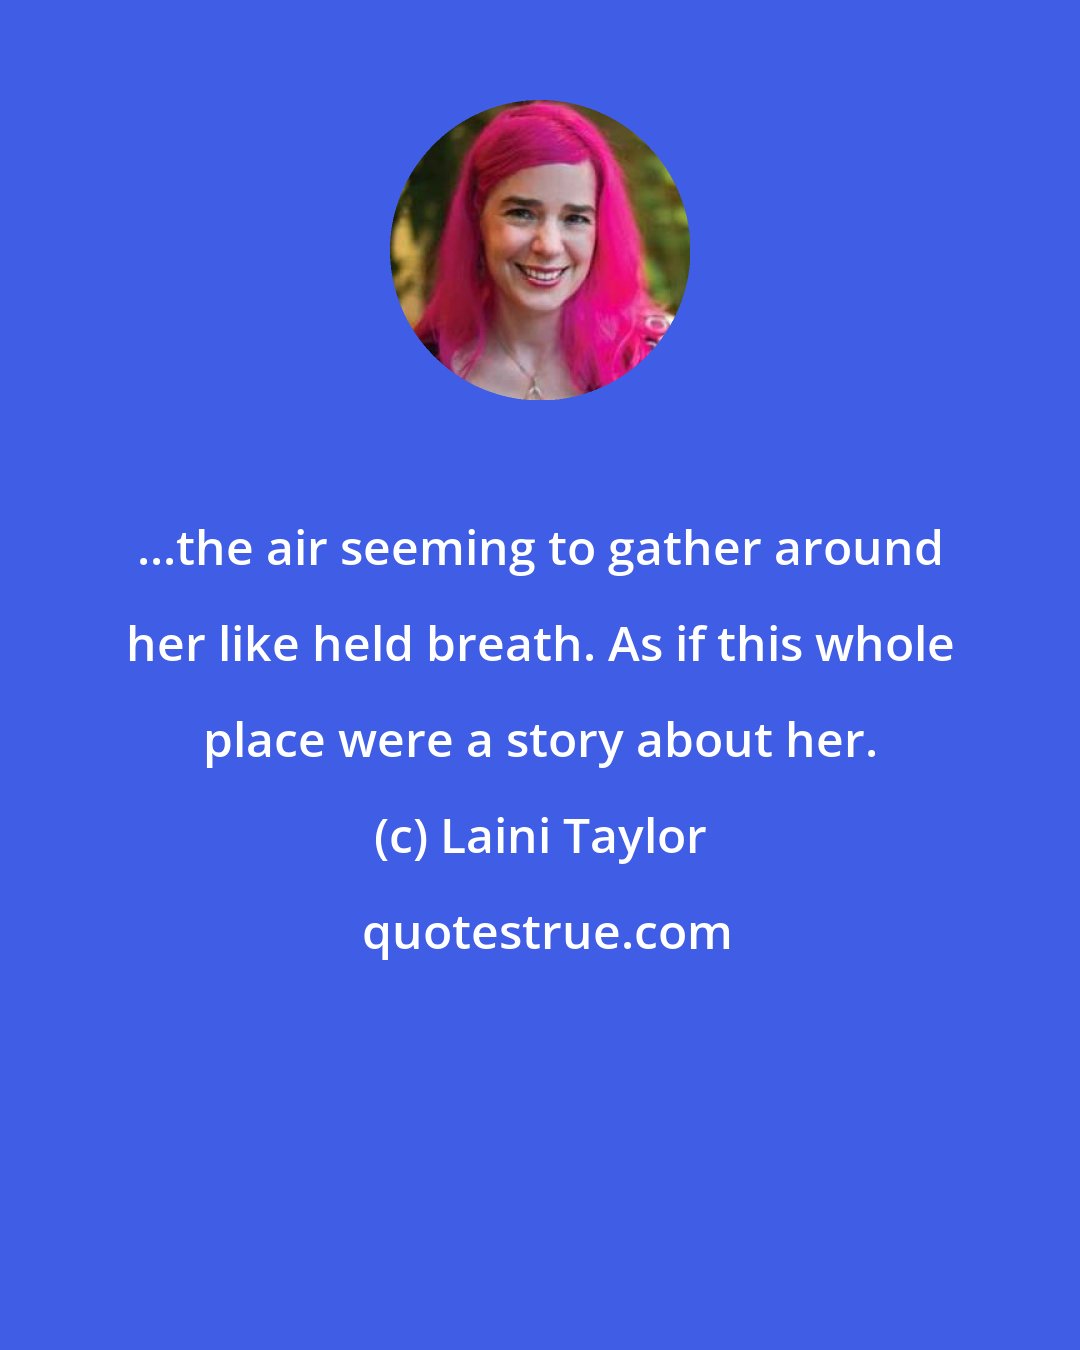 Laini Taylor: ...the air seeming to gather around her like held breath. As if this whole place were a story about her.